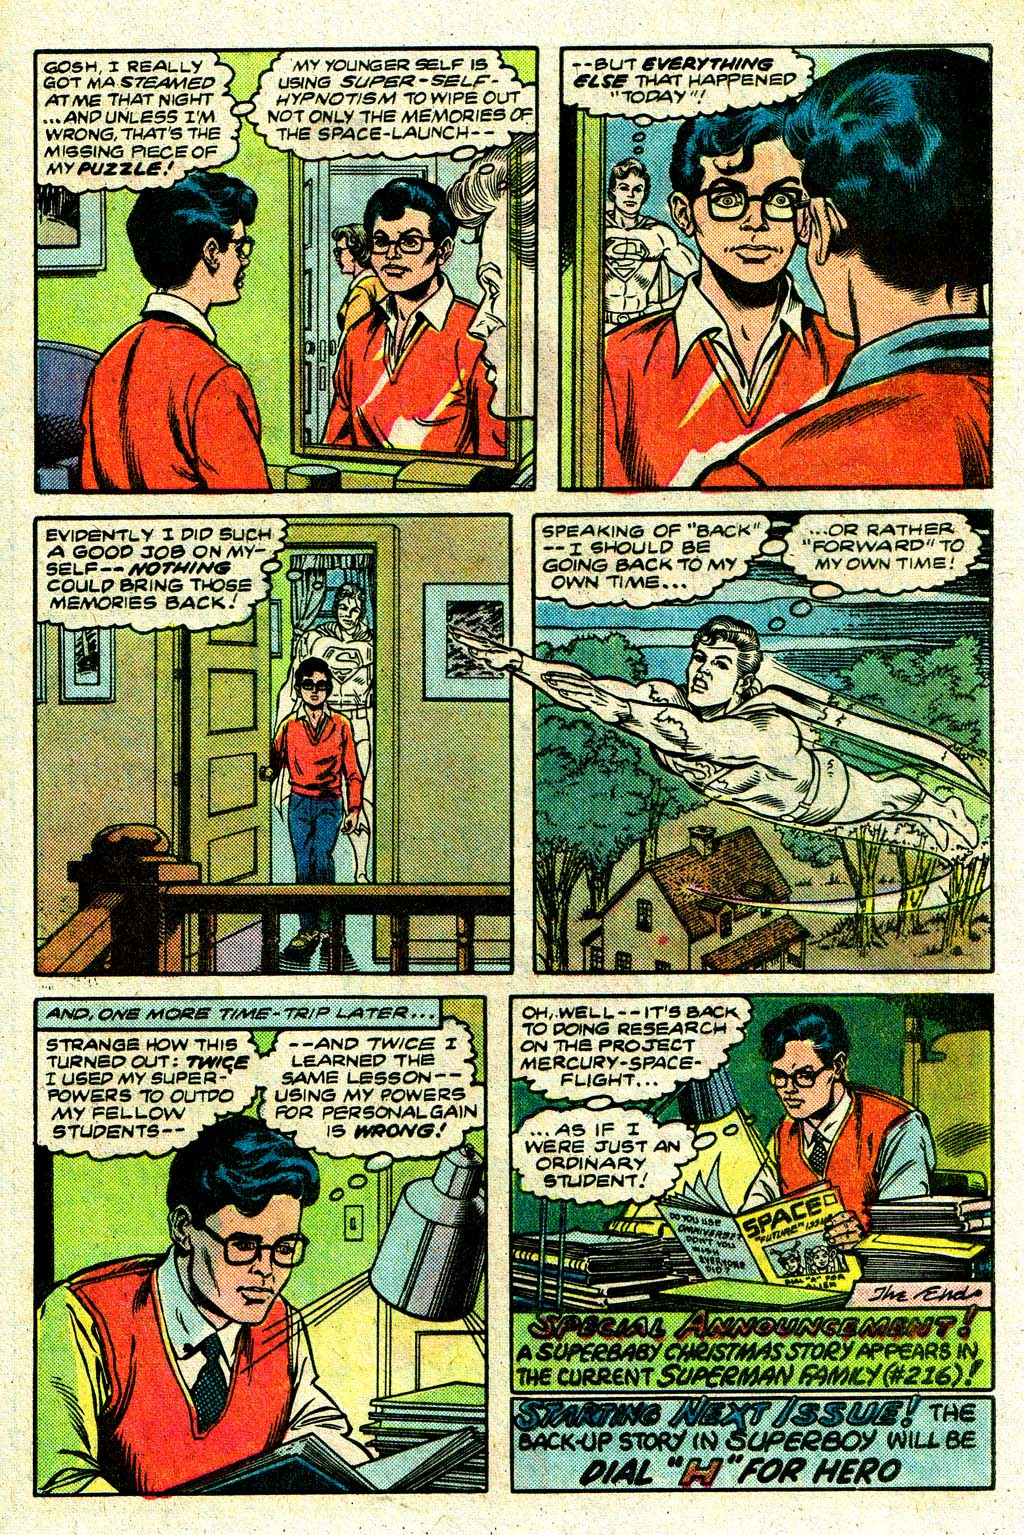 The New Adventures of Superboy 27 Page 32